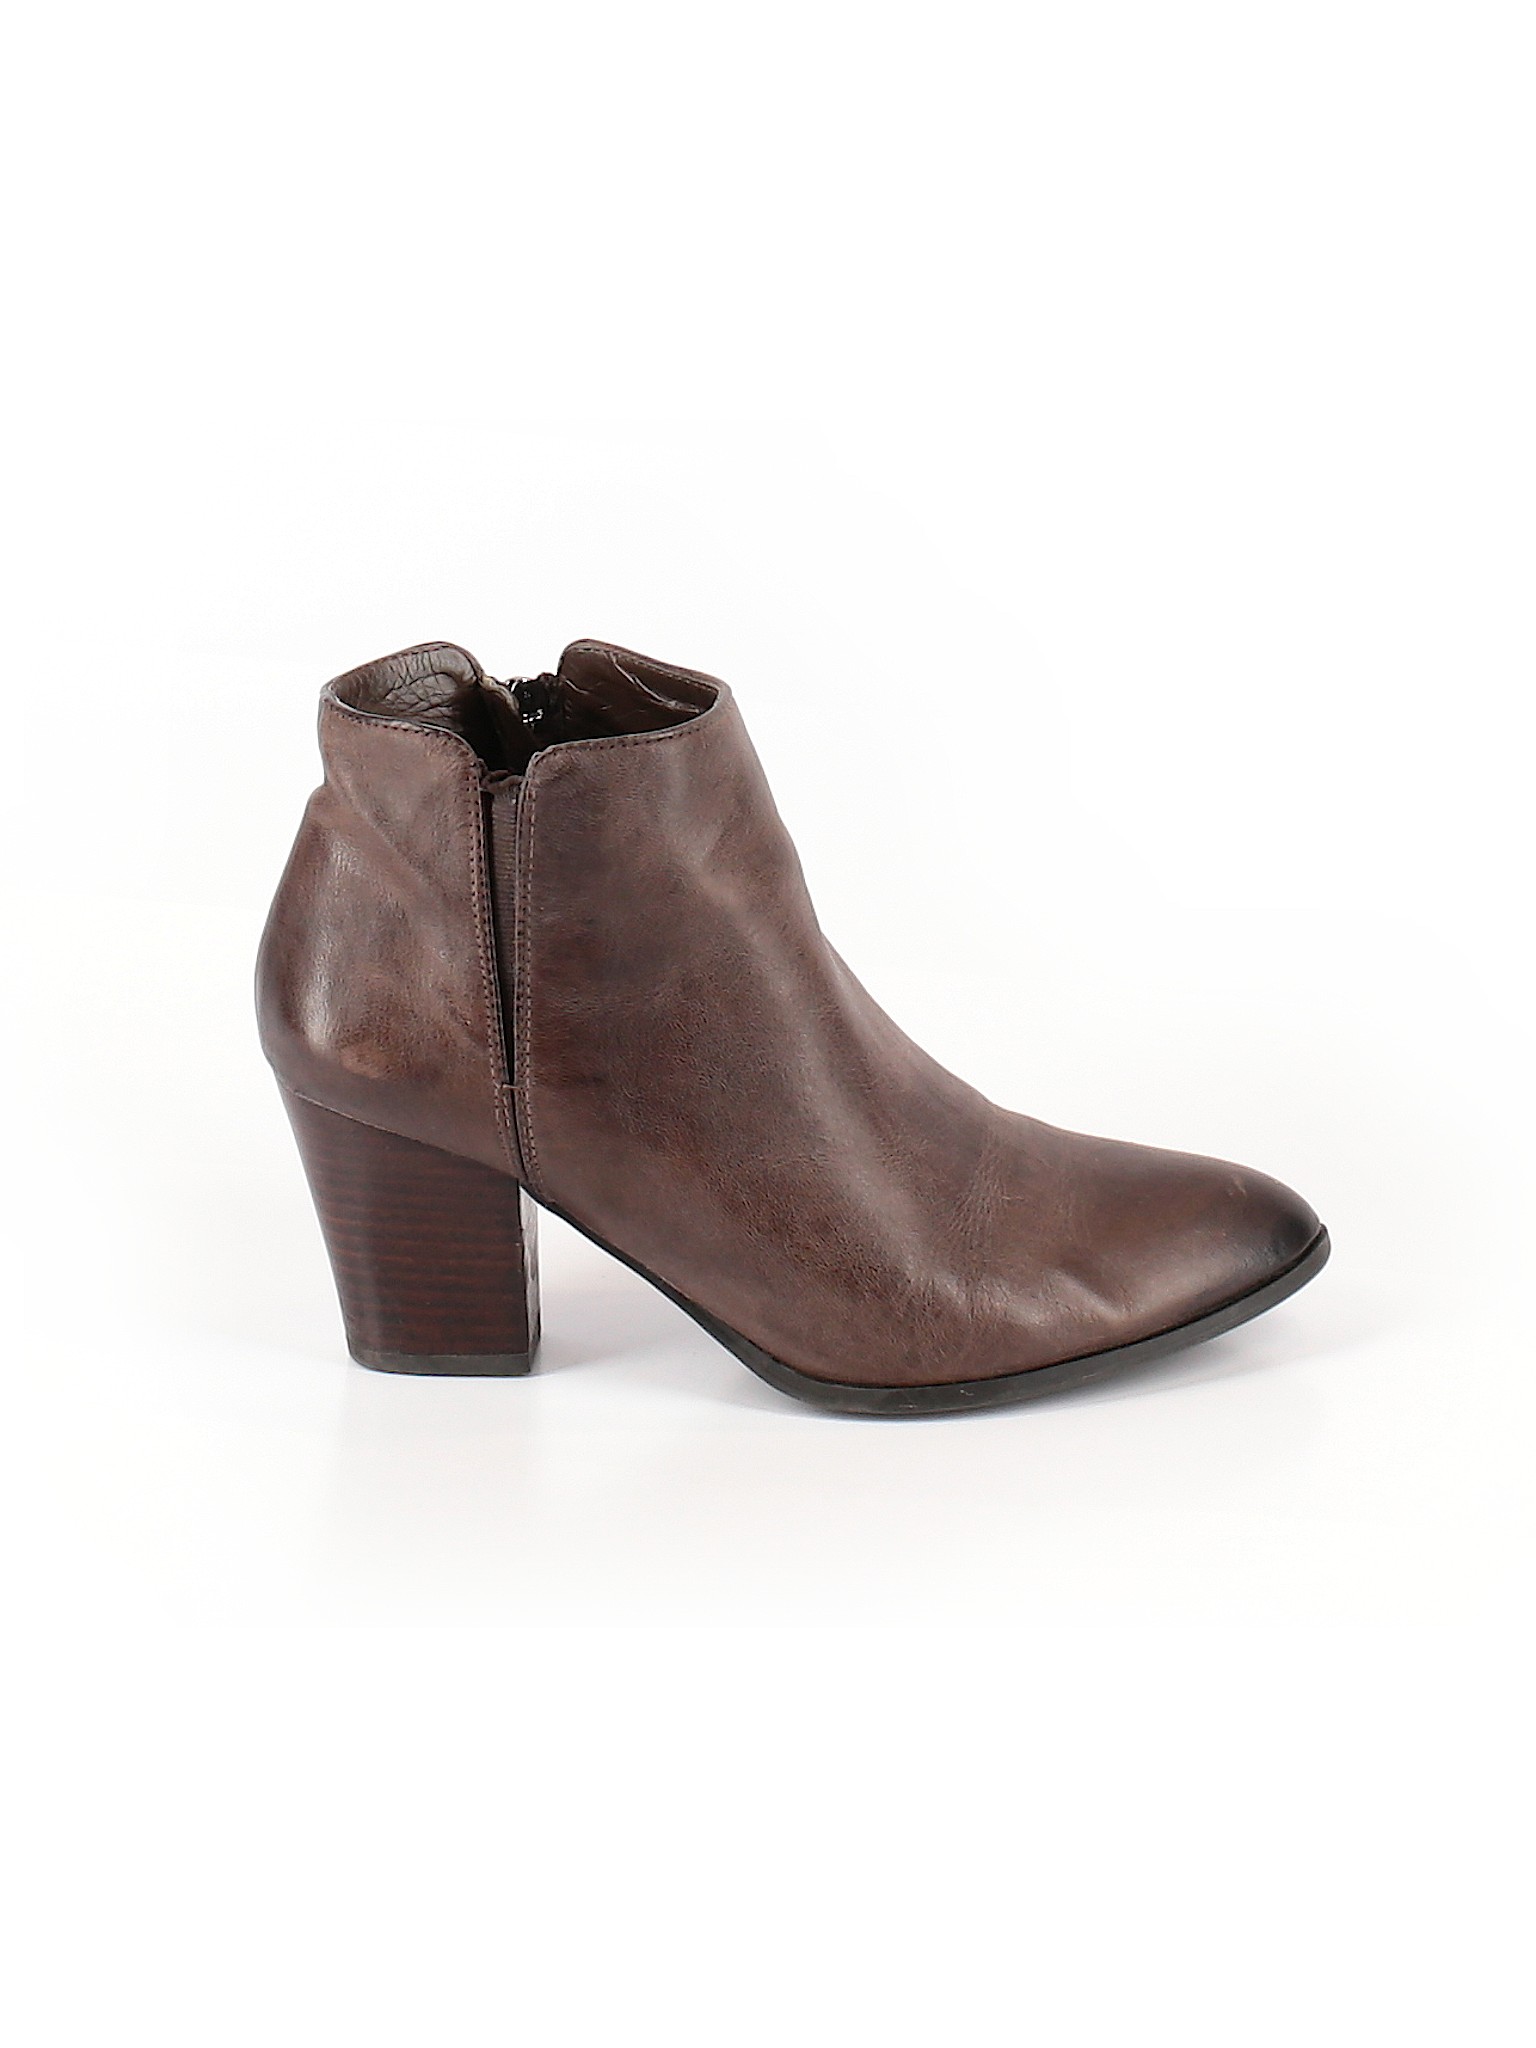 Franco Sarto Women Brown Ankle Boots US 8 | eBay